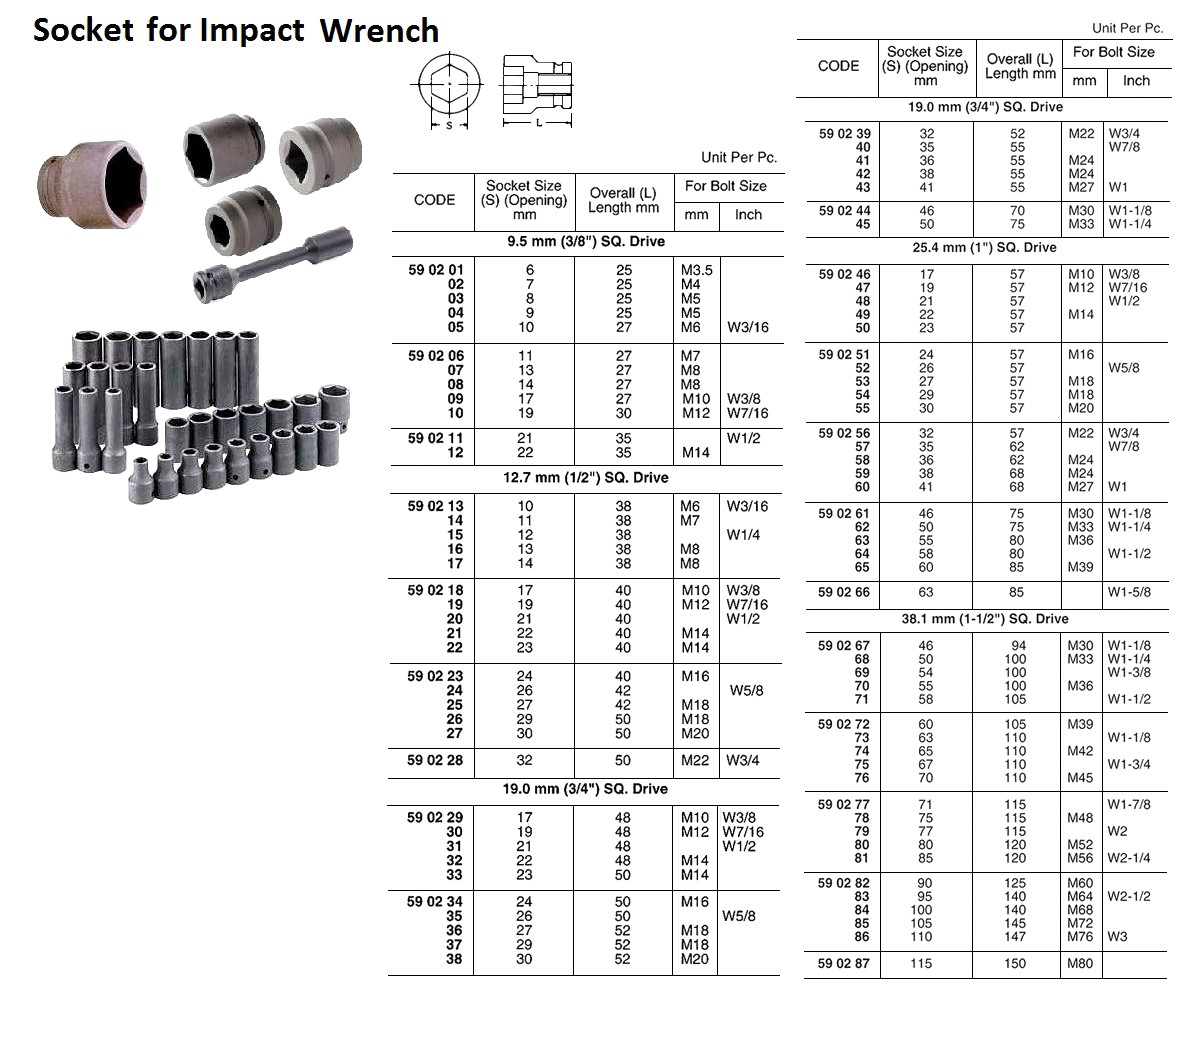 590267-590287 SOCKET FOR IMPACT WRENCH, 38.1MM/SQ DR.